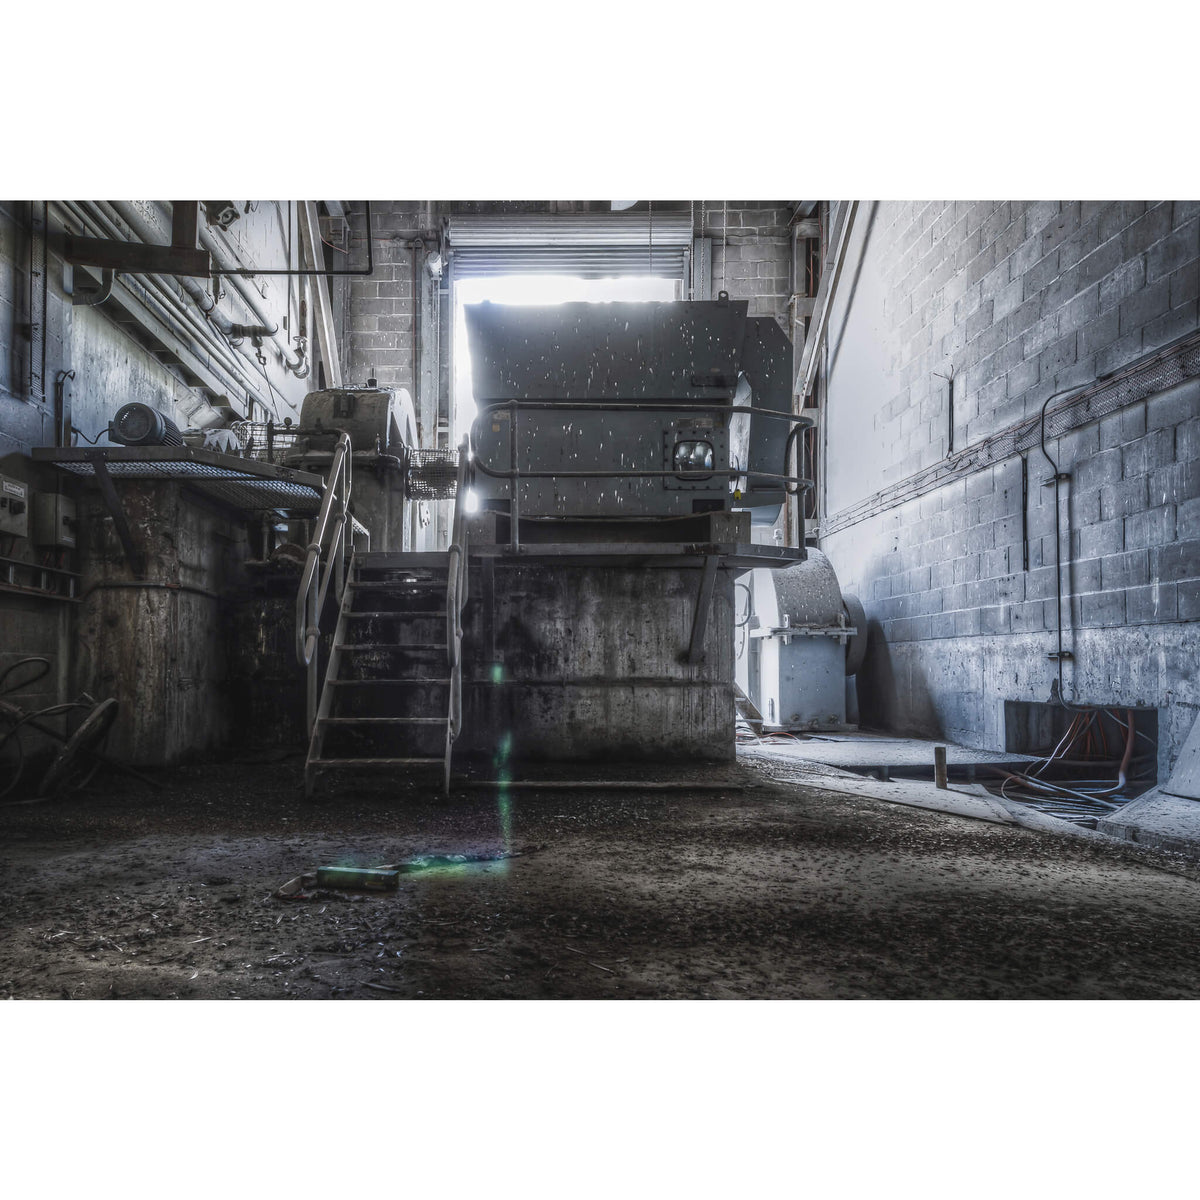 Number Six Ball Mill Drive | Kandos Cement Works Fine Art Print - Lost Collective Shop